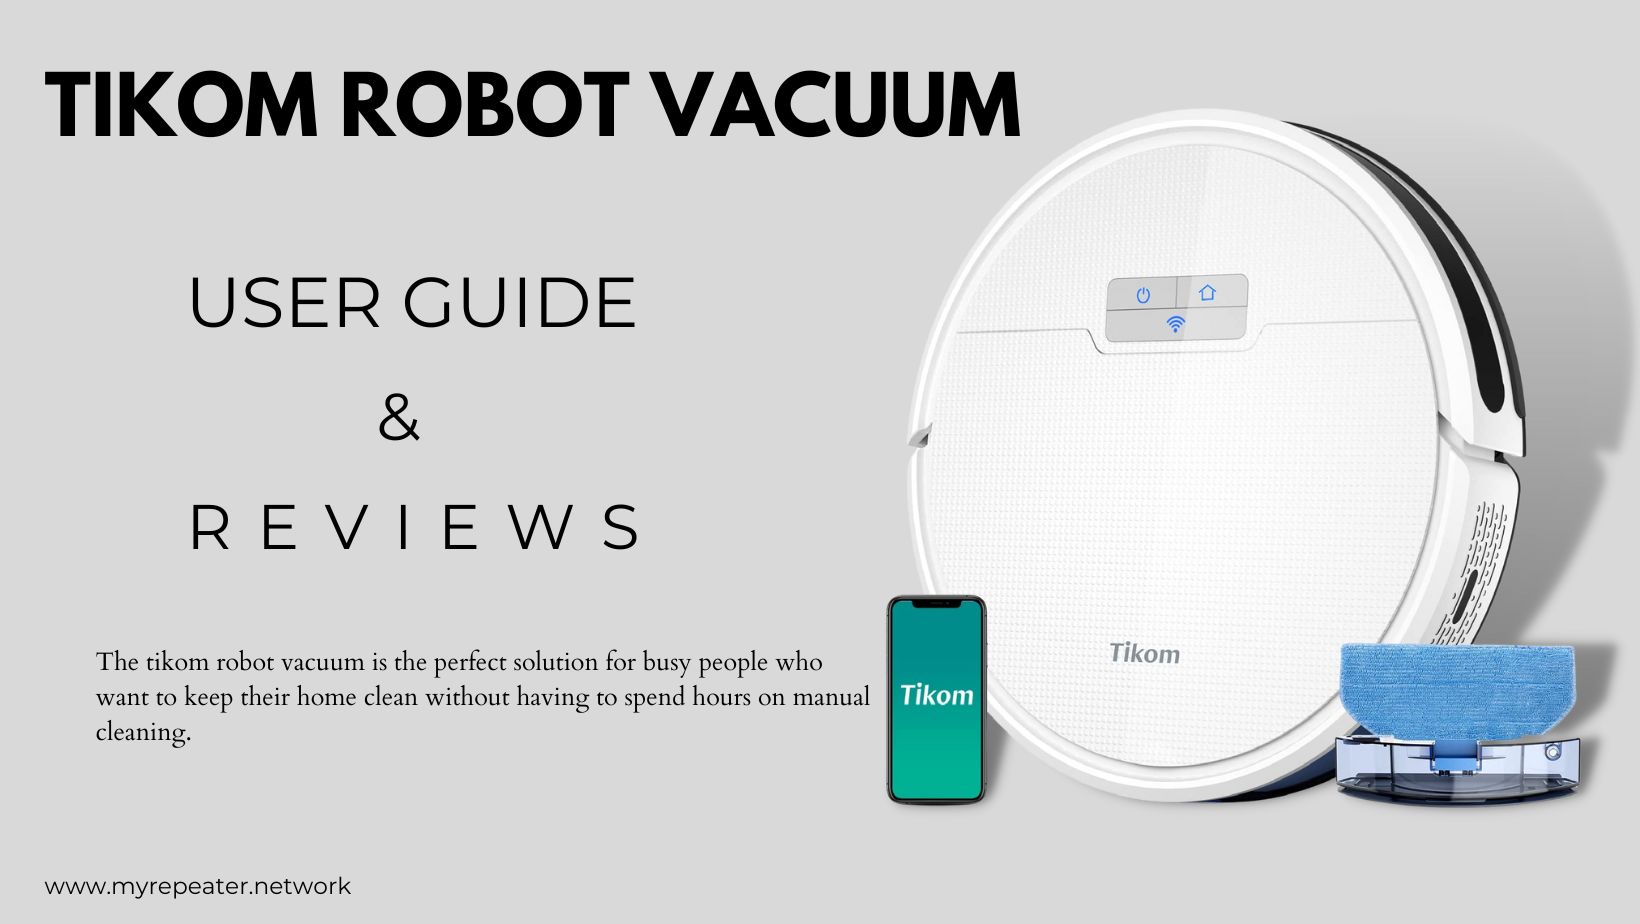 Tikom Robot Vacuum User Guide, Reviews And Features -